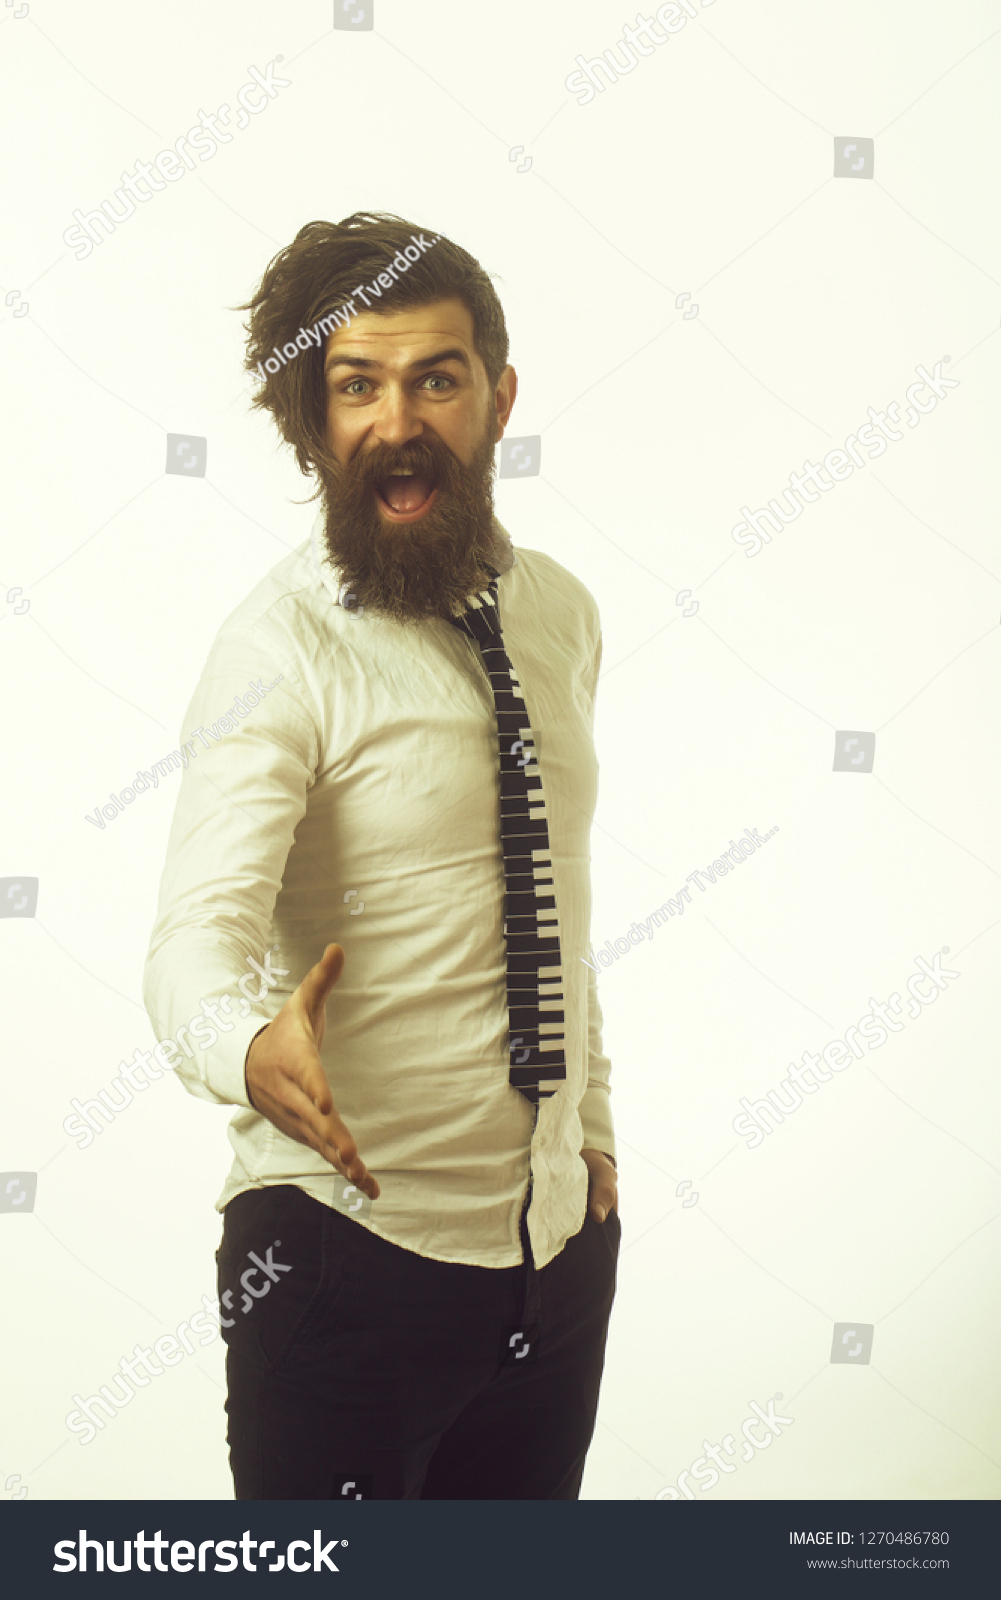 Hipster in shirt and musical tie. Guy hold hand for handshake. Business fashion and beauty. Fashion model with stylish hair isolated on white. Man with long beard and mustache on happy face. #1270486780